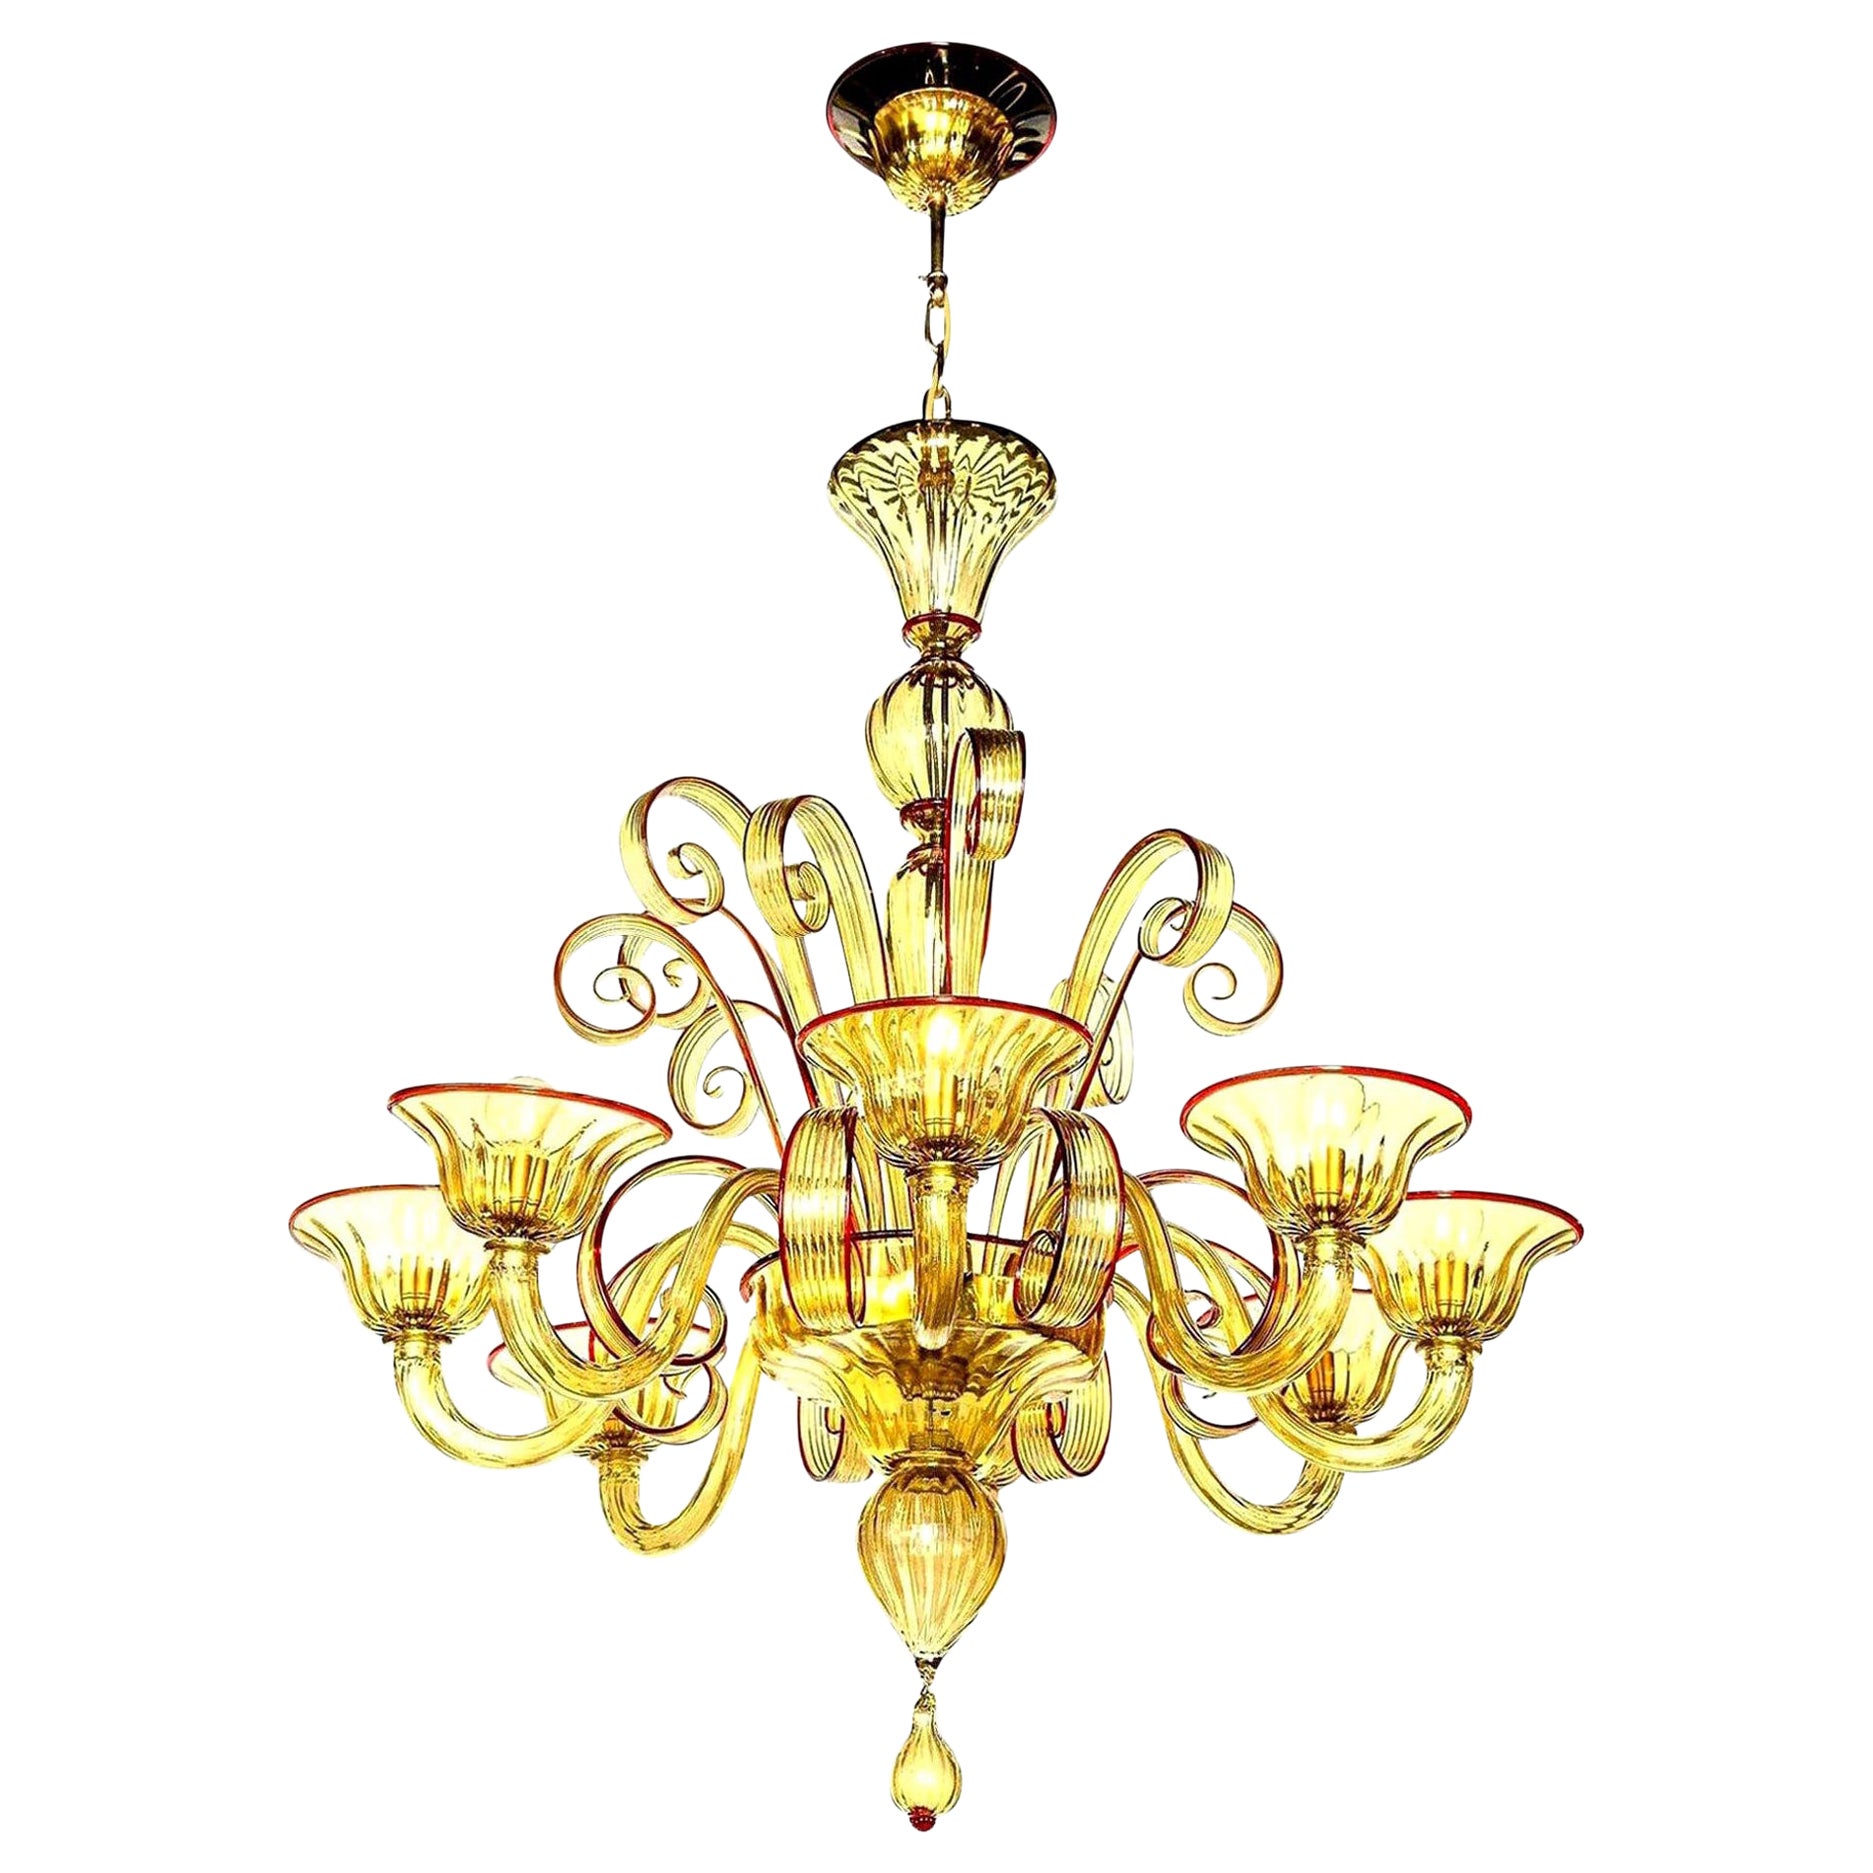 Venetian Glass Chandelier, Amber Color/Red, Contemporary, 8 Arms, Murano, Italy For Sale